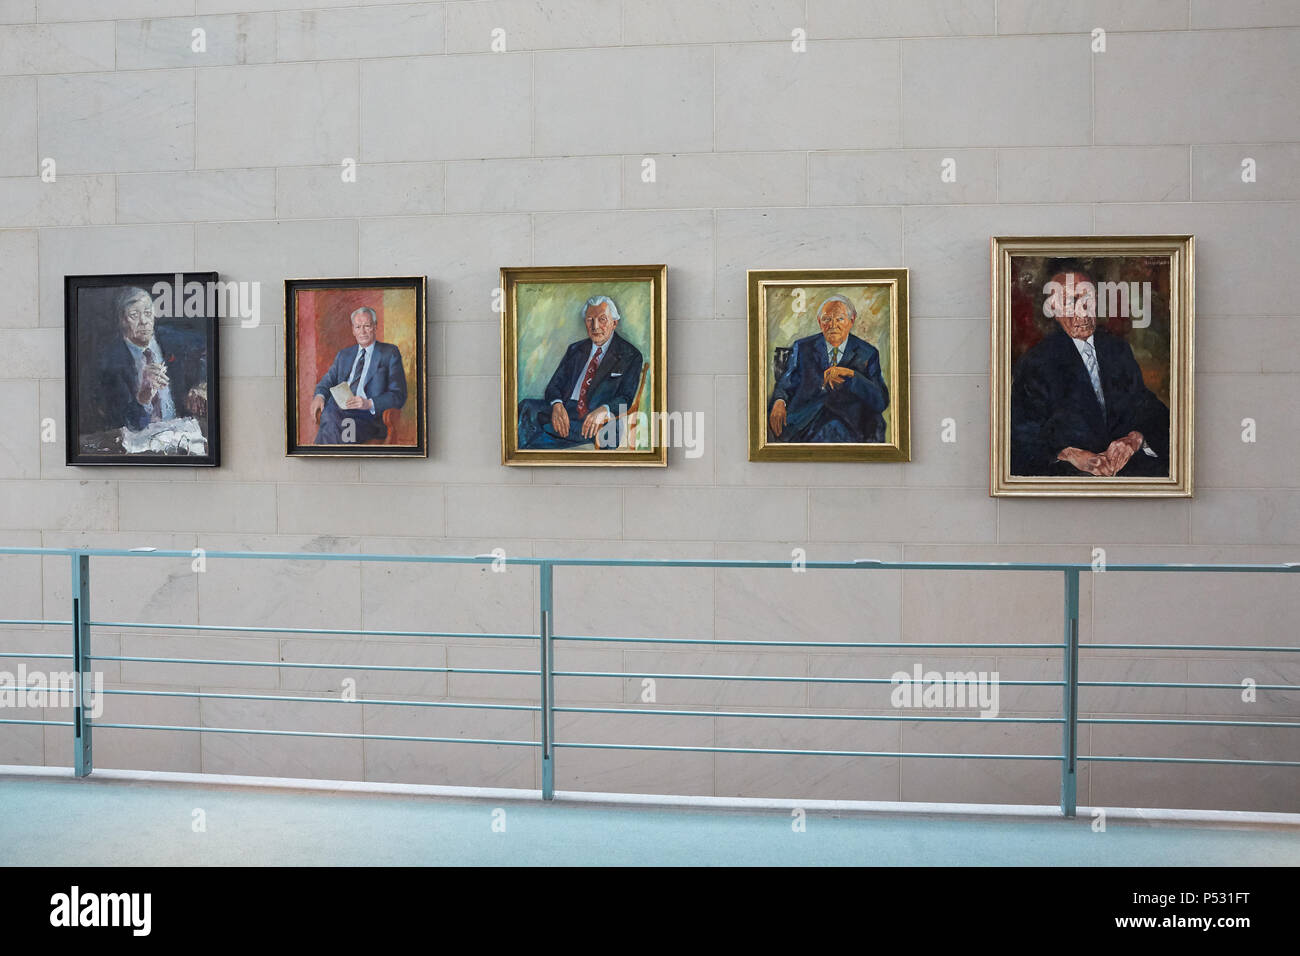 Berlin, Germany - Painting of the chancellor gallery in the Federal Chancellery. Stock Photo